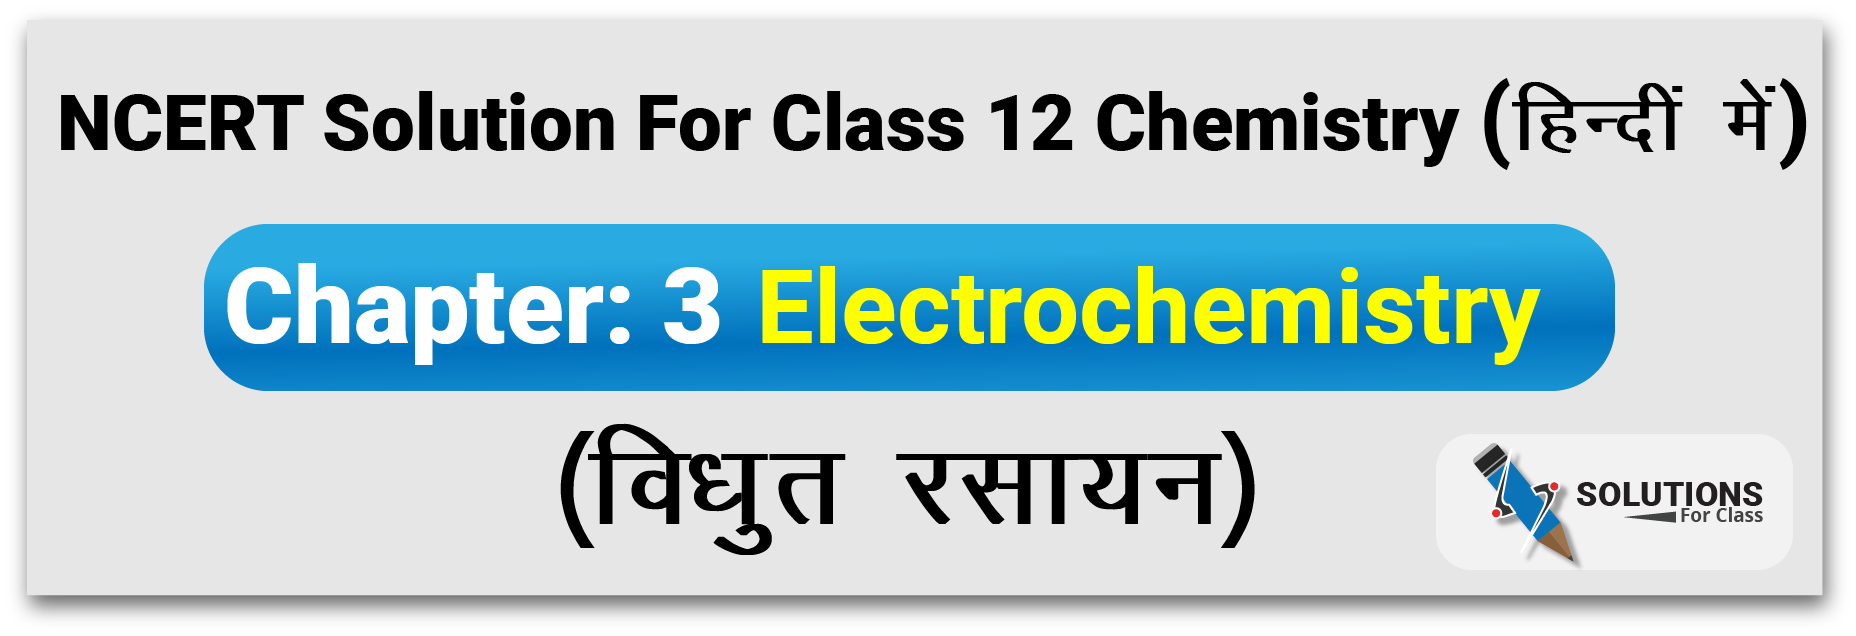 NCERT Solutions For Class 12, Chemistry, Chapter 3 (Hindi)